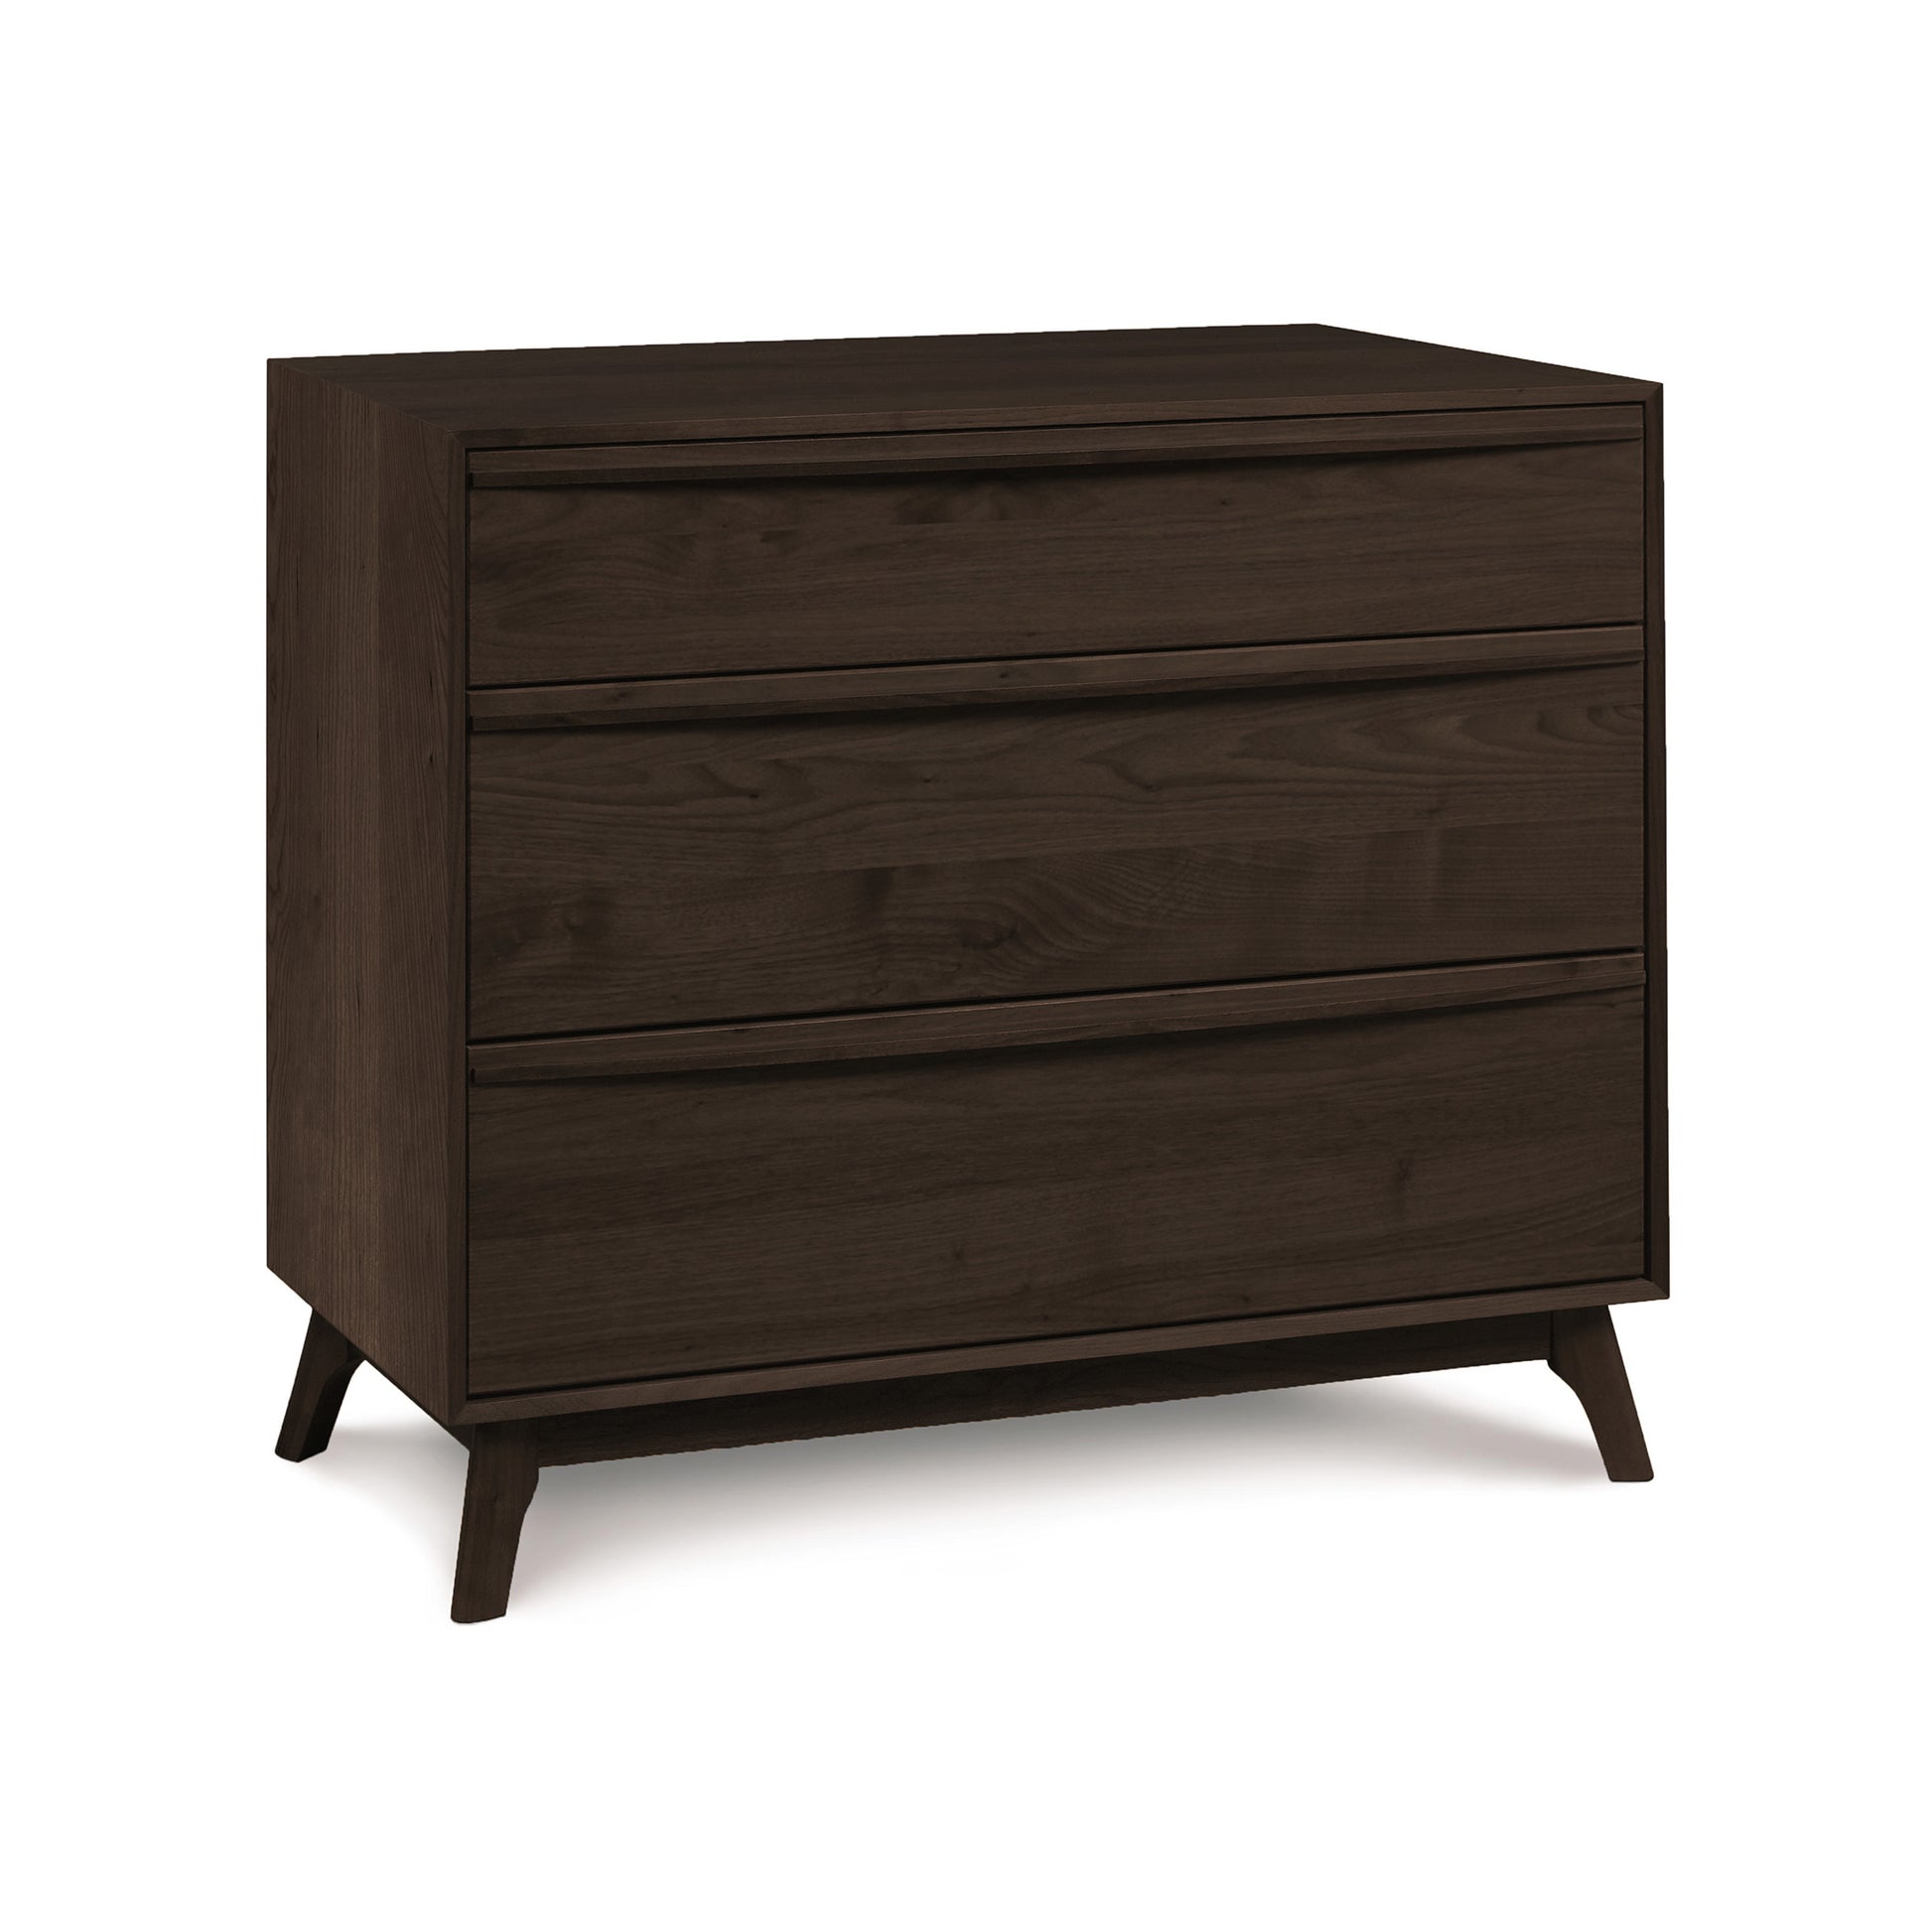 A modern Copeland Furniture Catalina 3-Drawer Chest, made of hardwood, placed on a white background.